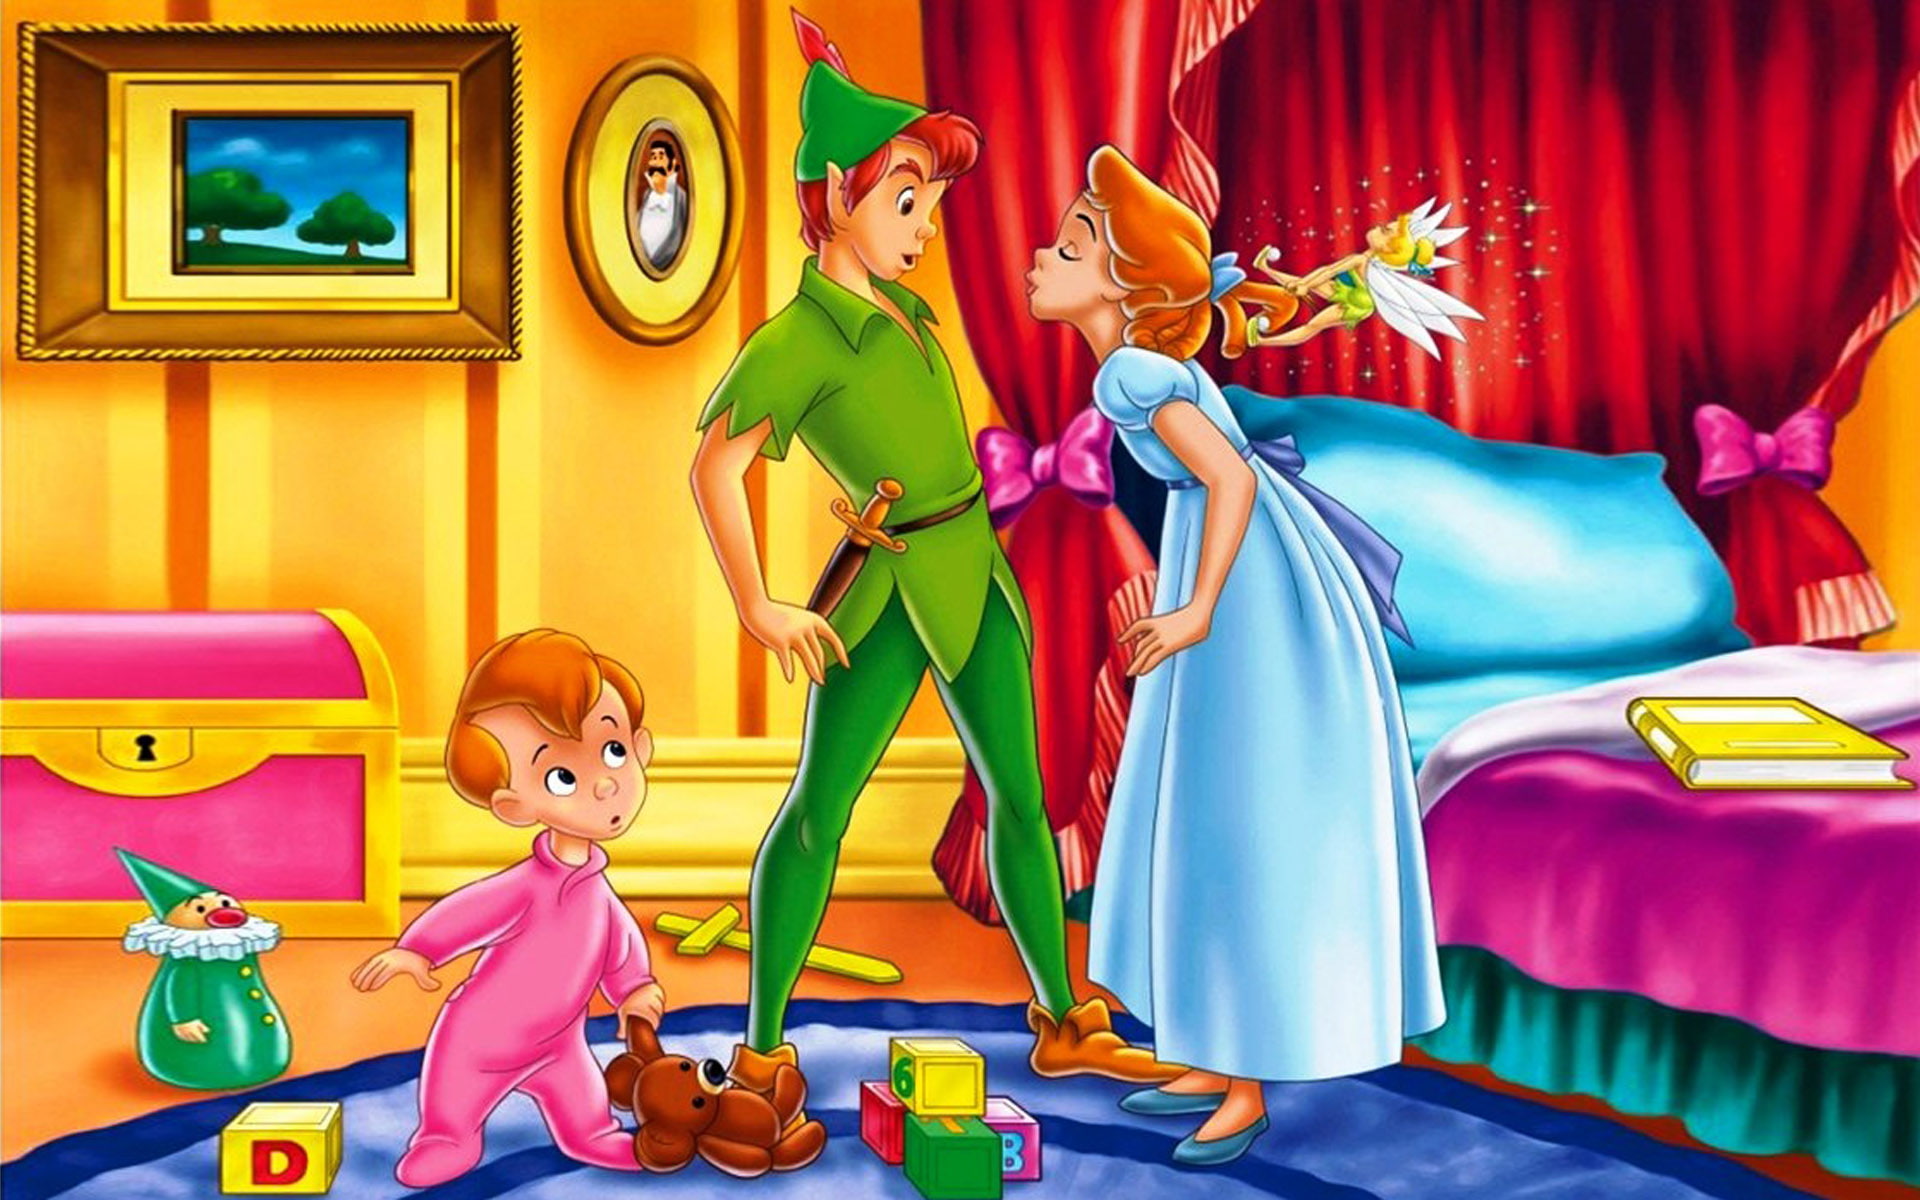 Peter Pan With Wendy Darling And Michael Darling Disney Images Free Download 1920×1200